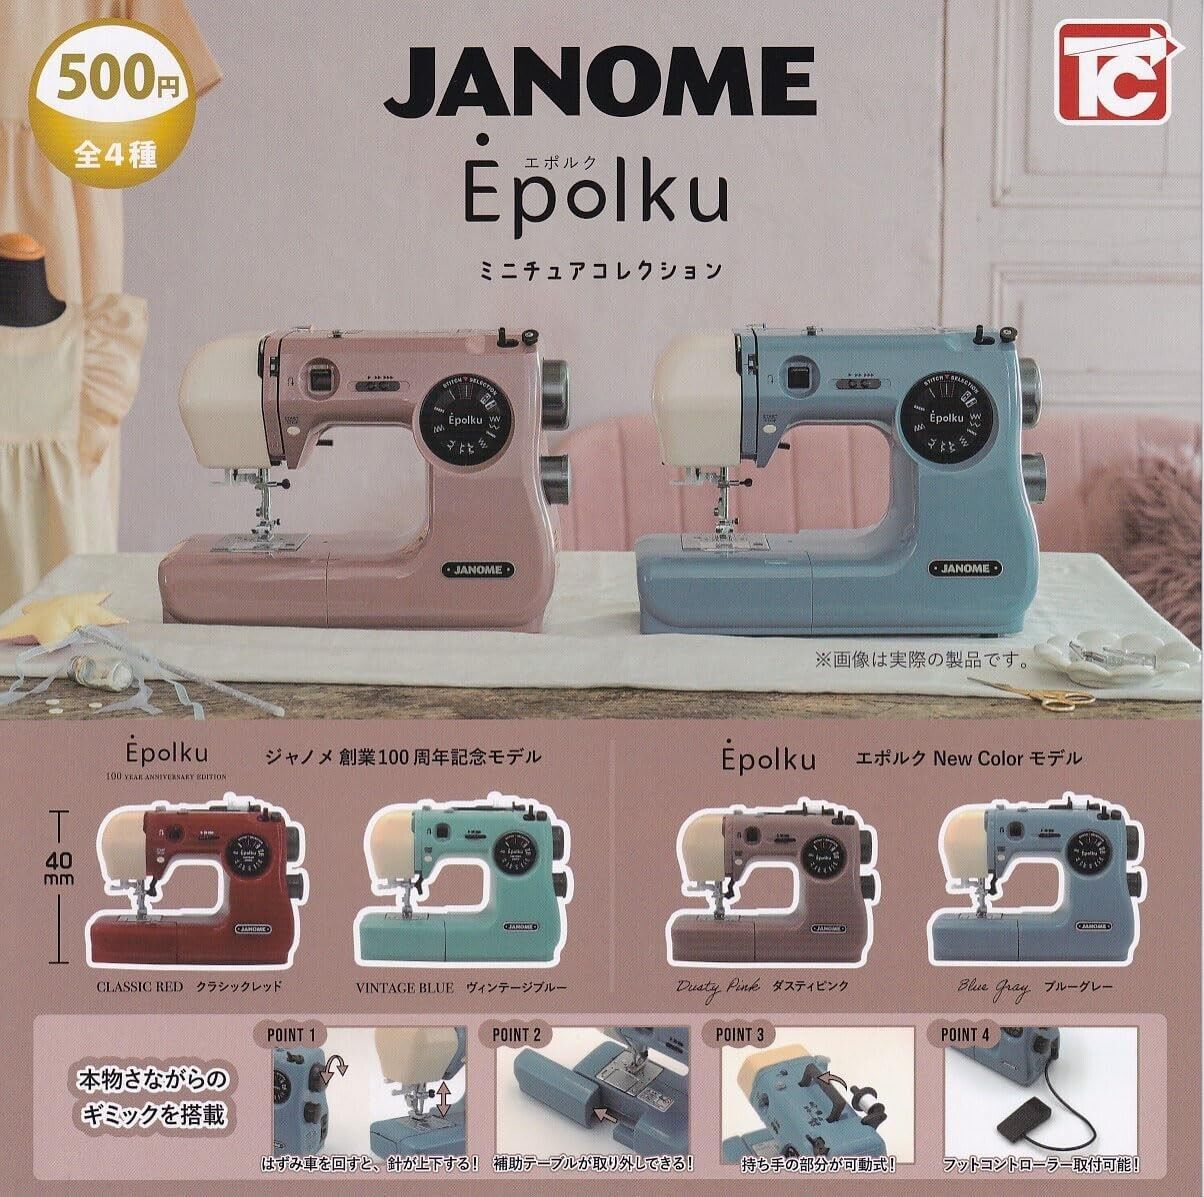 JANOME Epolku Miniature Collection Set of 4 types Full Complete New from Japan